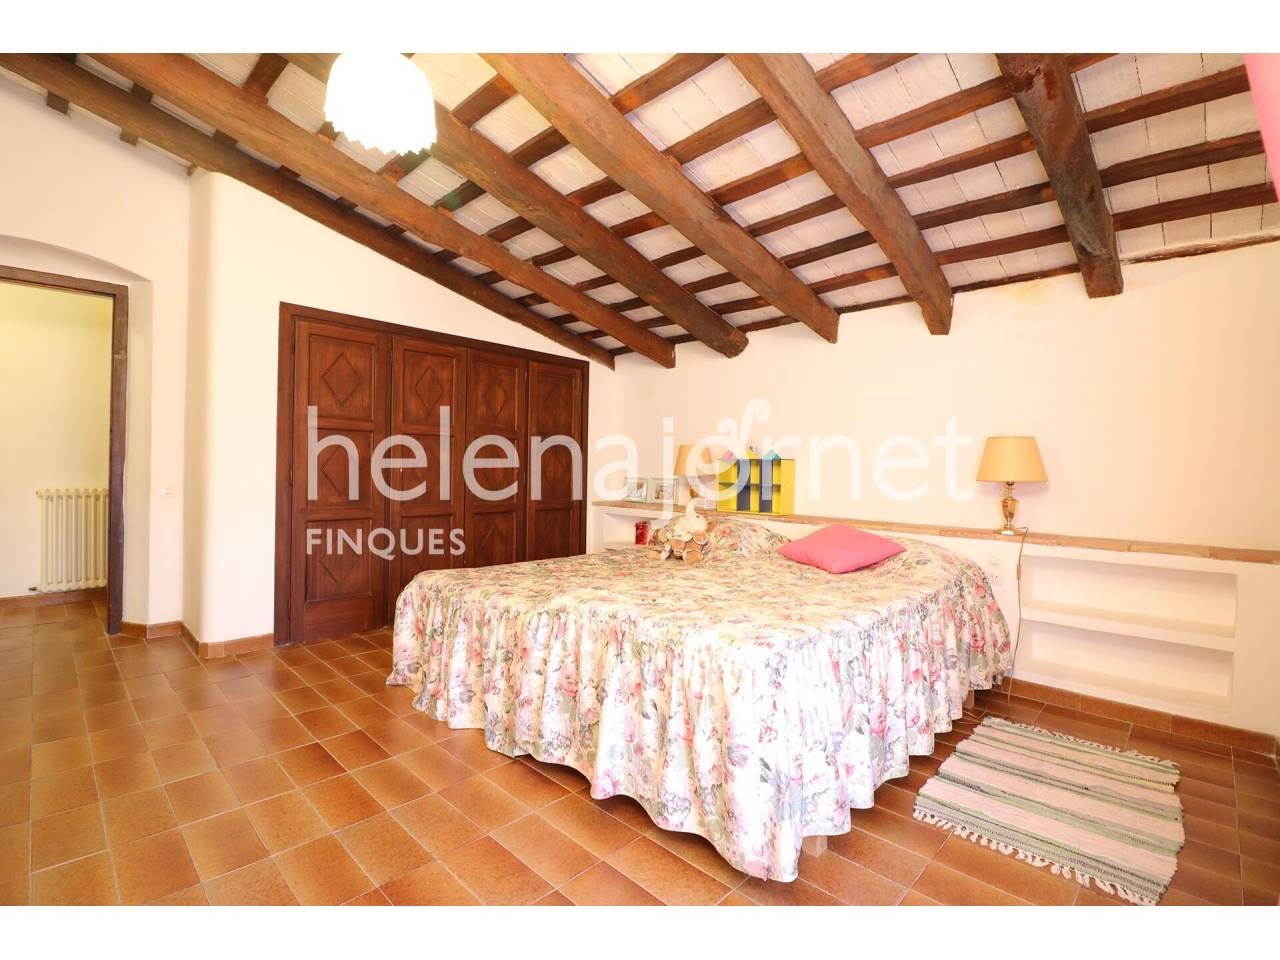 Excellent rustic estate with a renewed 563 m2 farmhouse and 4.8 hectares of land. - 2504